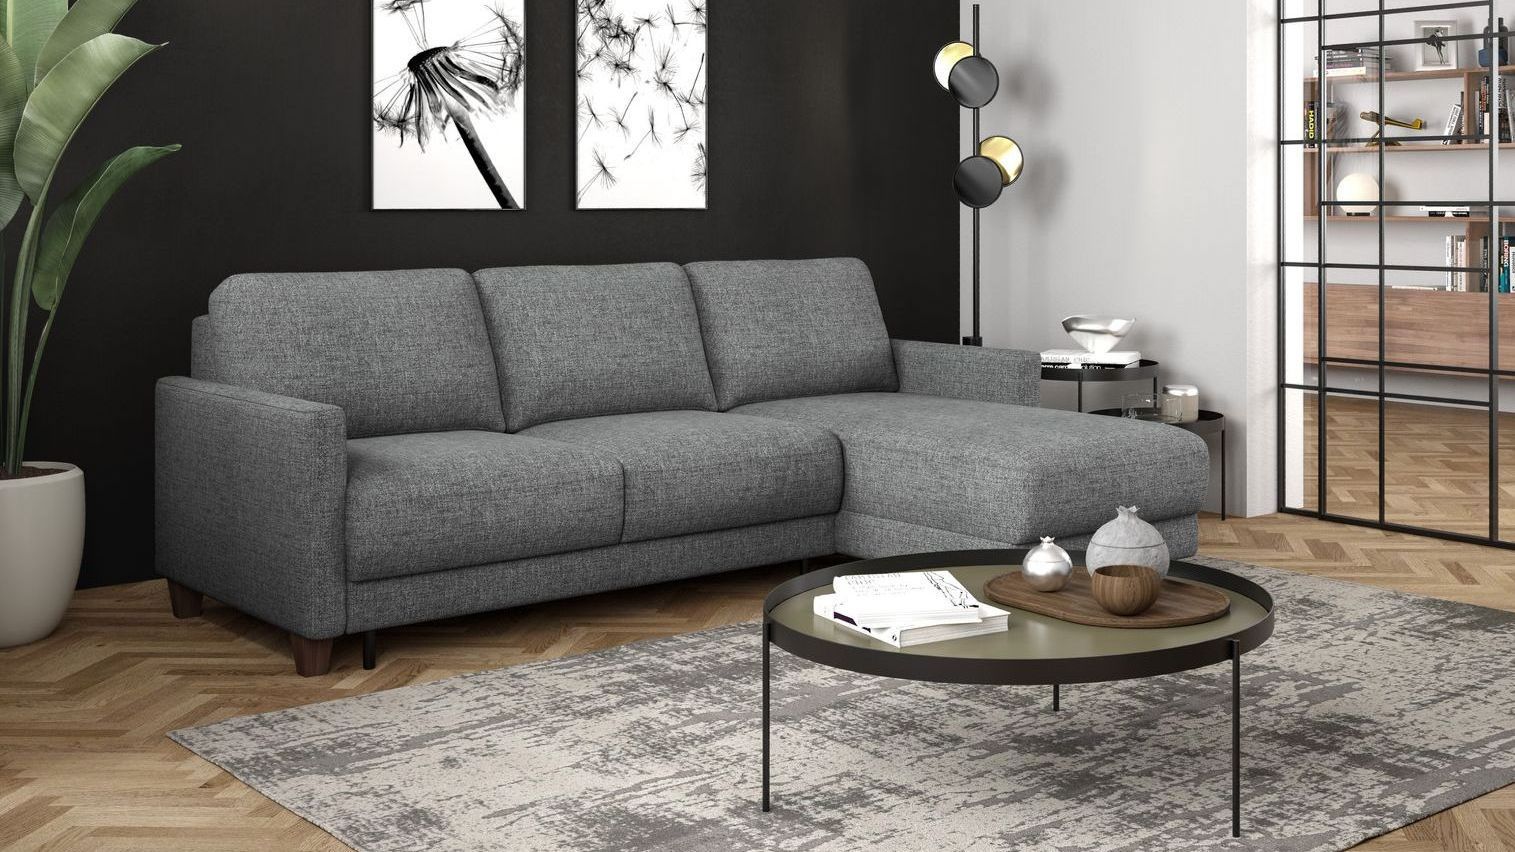 Luonto Martta Sleeper Sectional From  Luonto Furniture